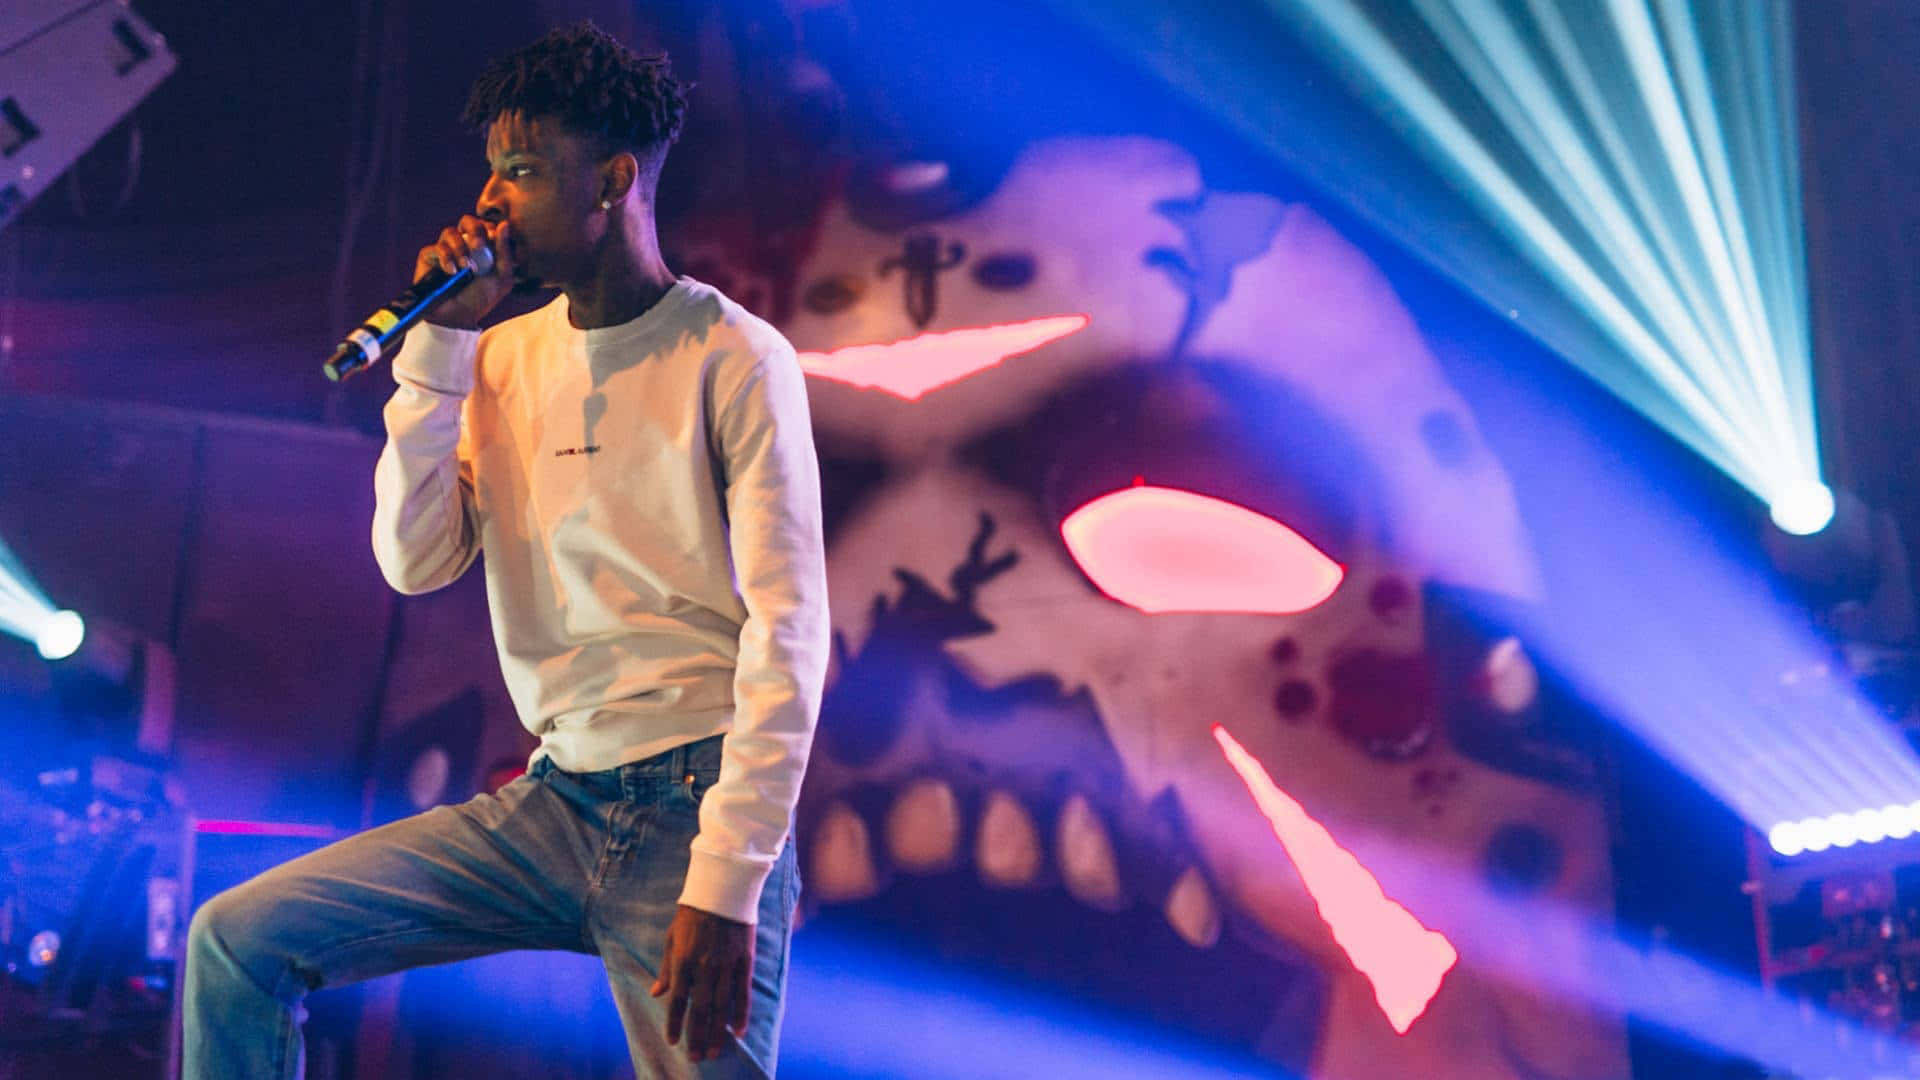 100+] 21 Savage Pictures